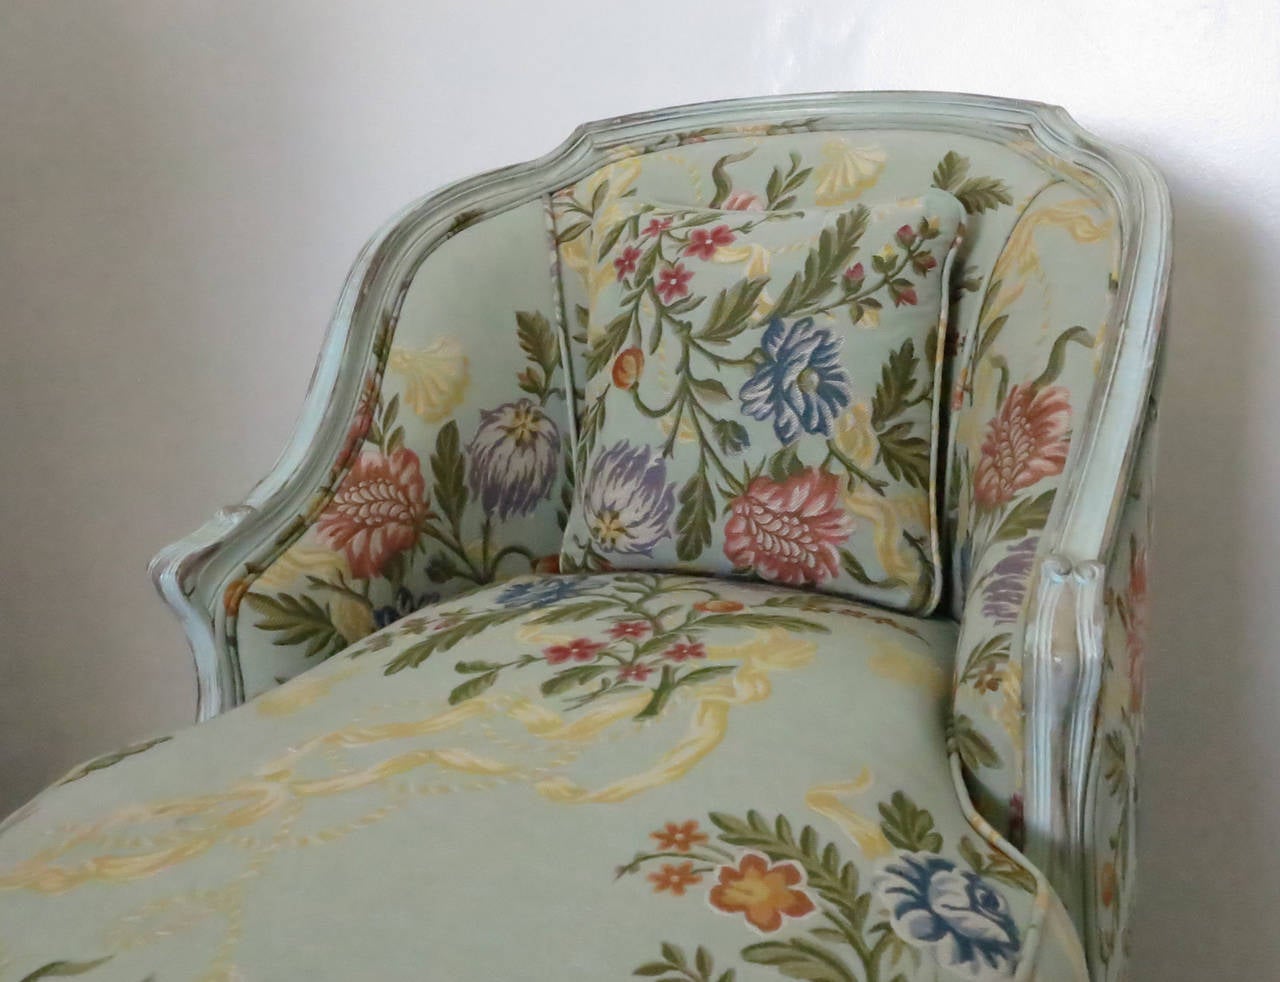 Recently reupholstered in an attractive floral fabric. Distressed finish on the frame. Very comfortable and ready to use.